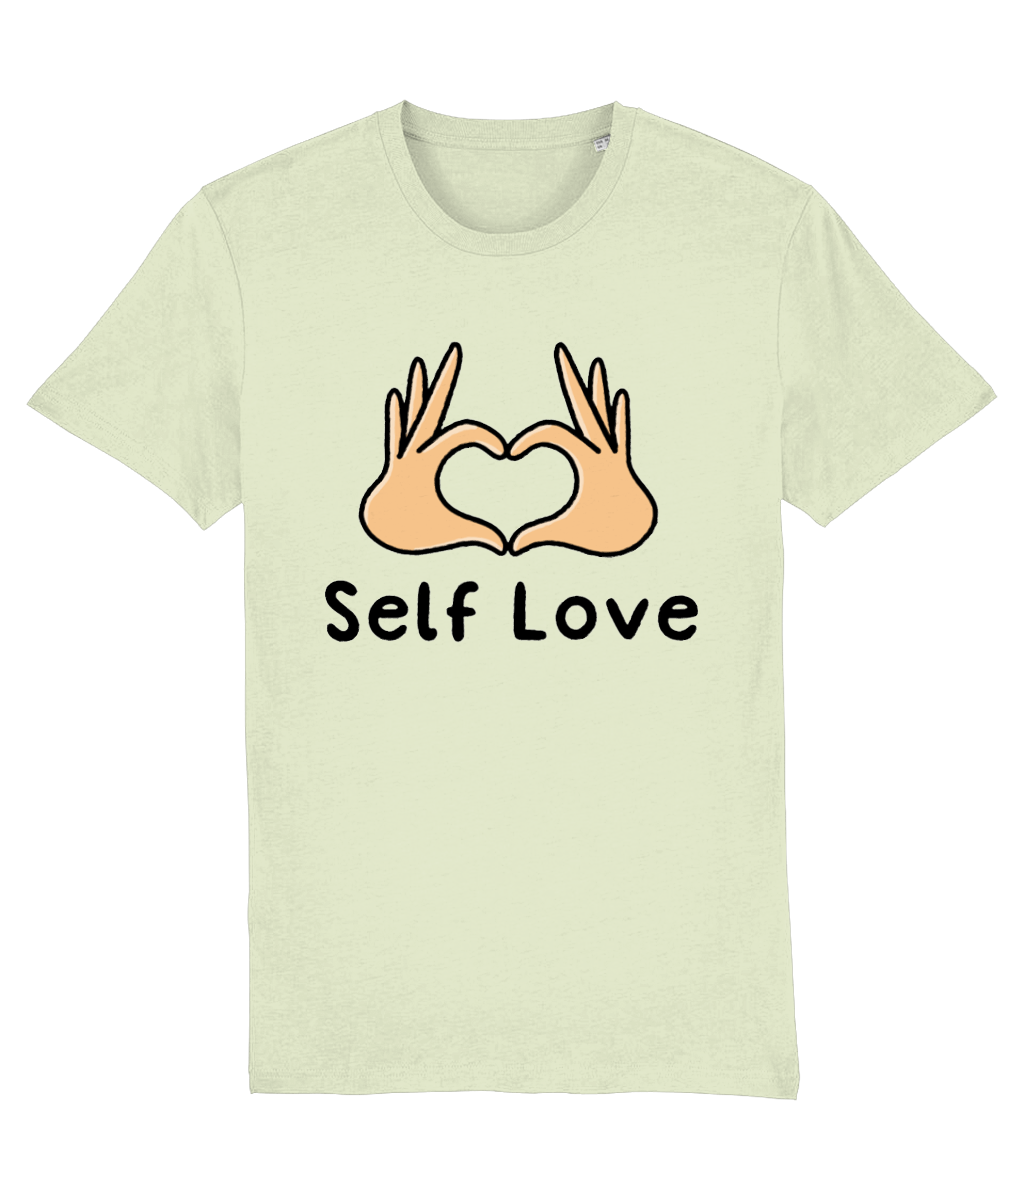 Pawsitivity T-Shirt - Self Love (Multi Colours Available)